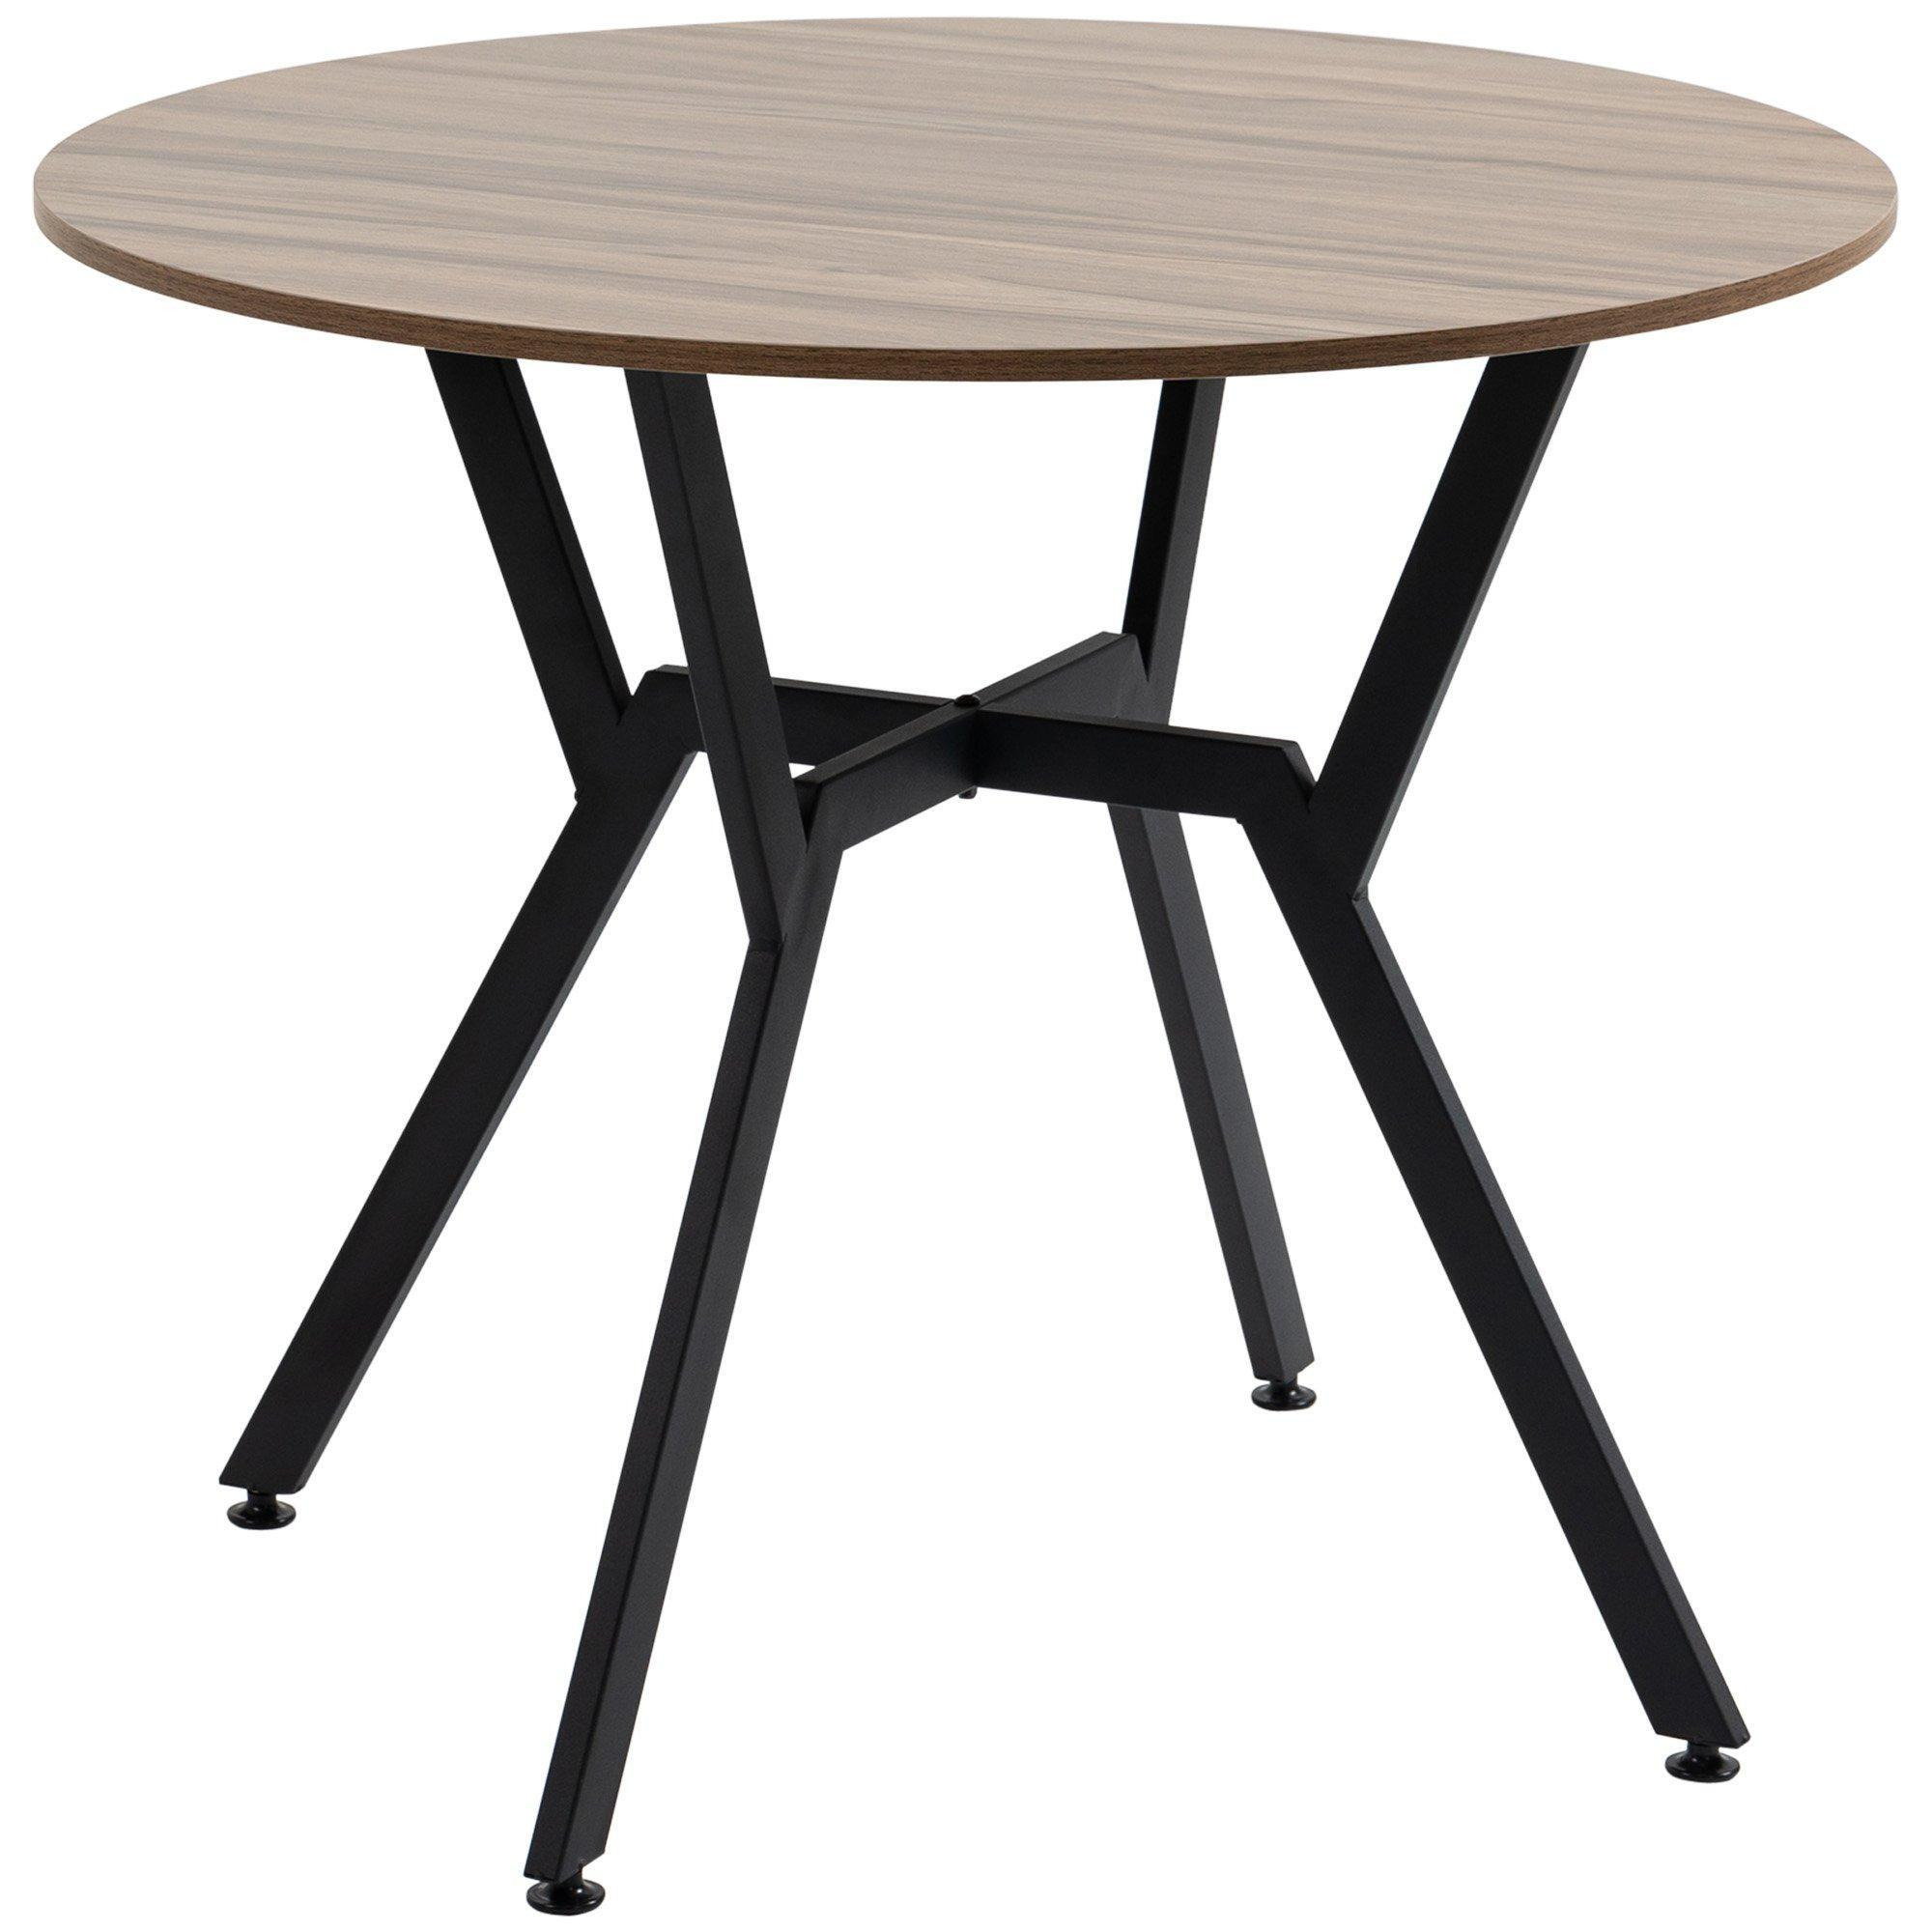 Dining Table with Round Top Steel Legs for Kitchen Dining Room Brown - image 1